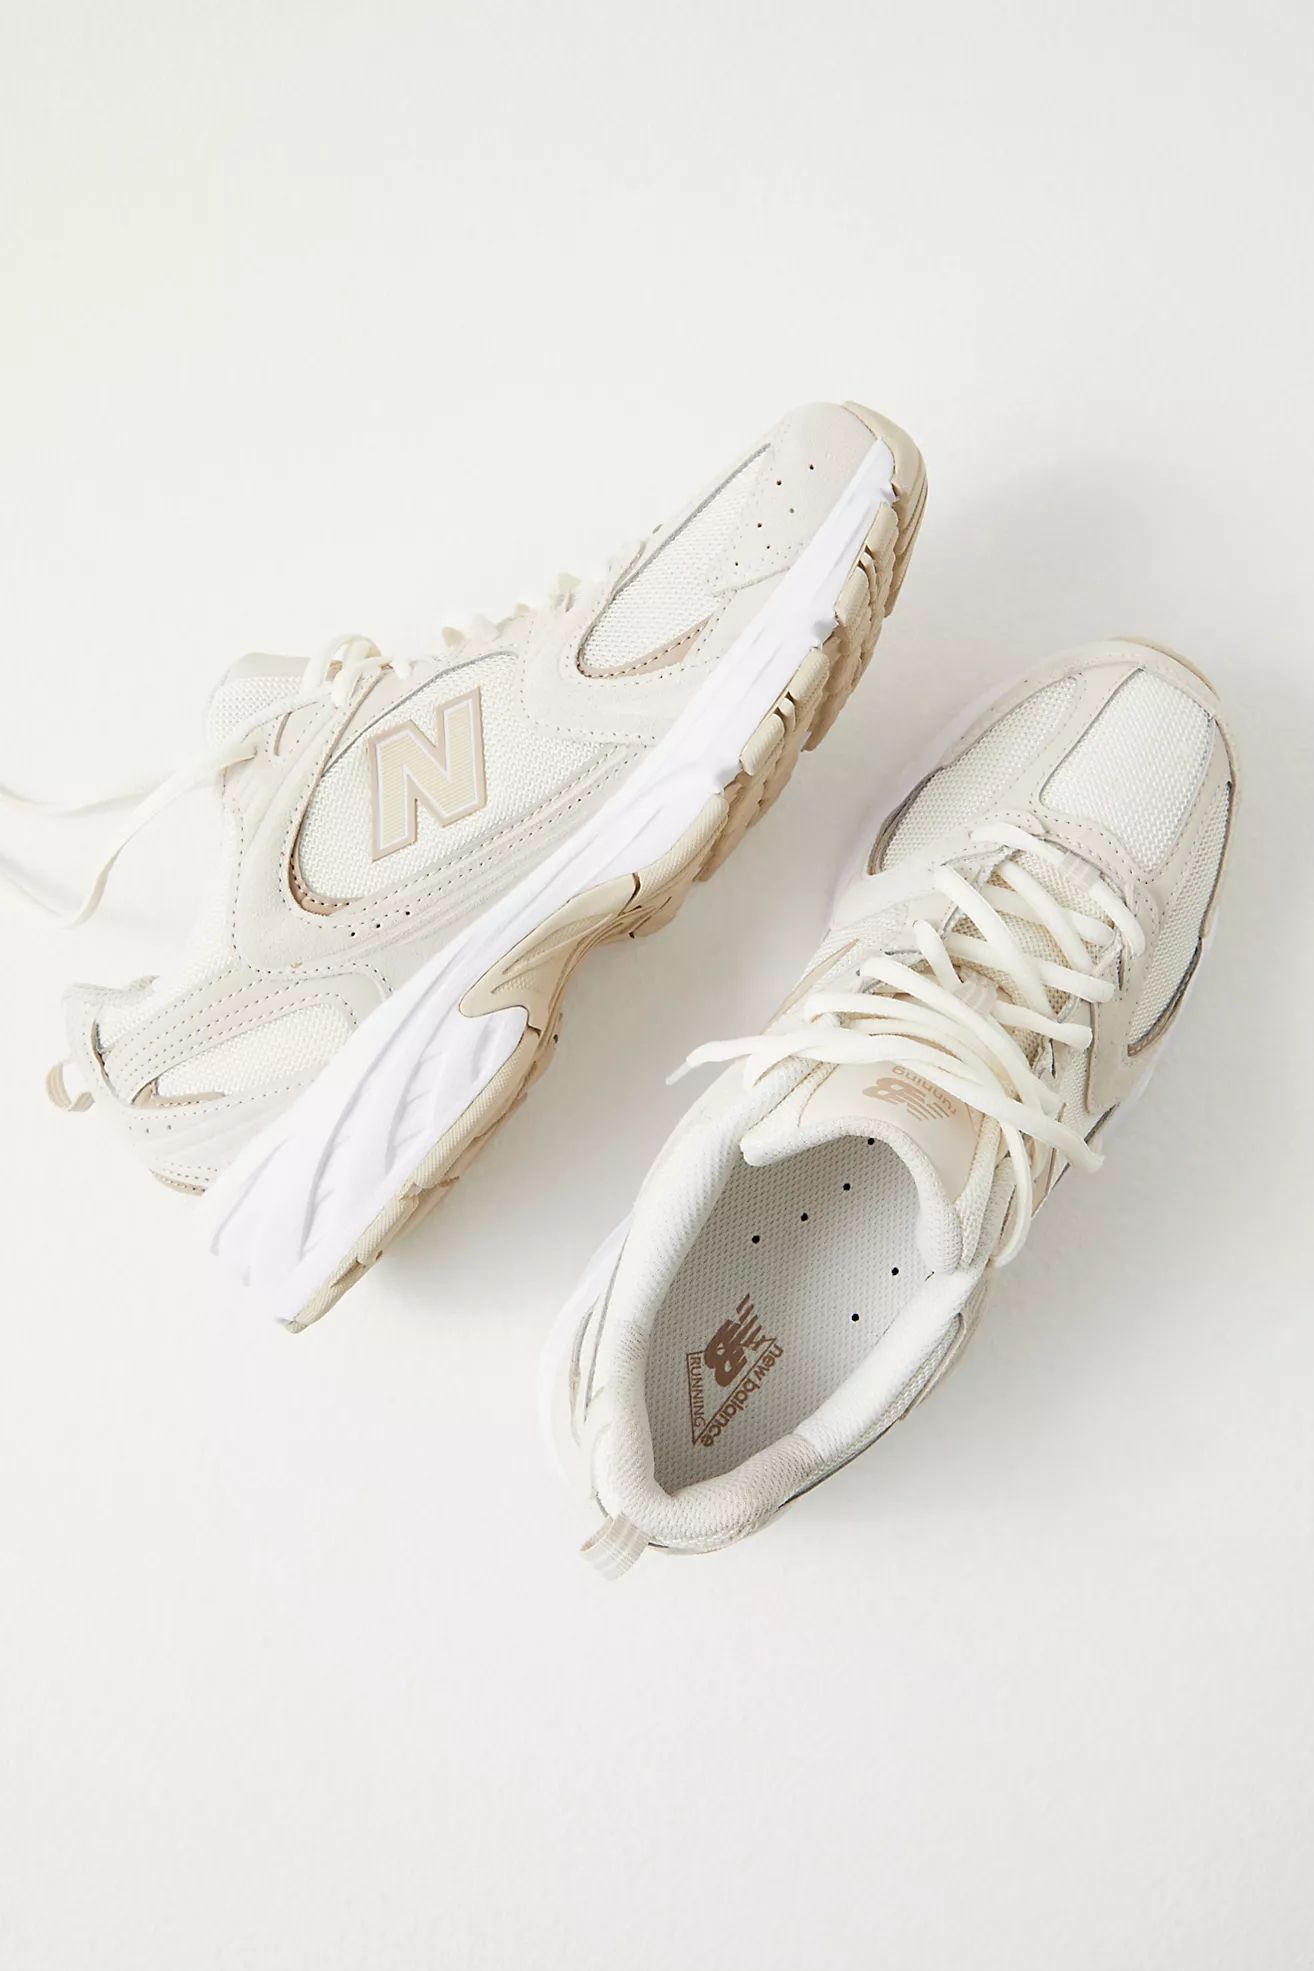 Shop all New Balance | Free People (Global - UK&FR Excluded)